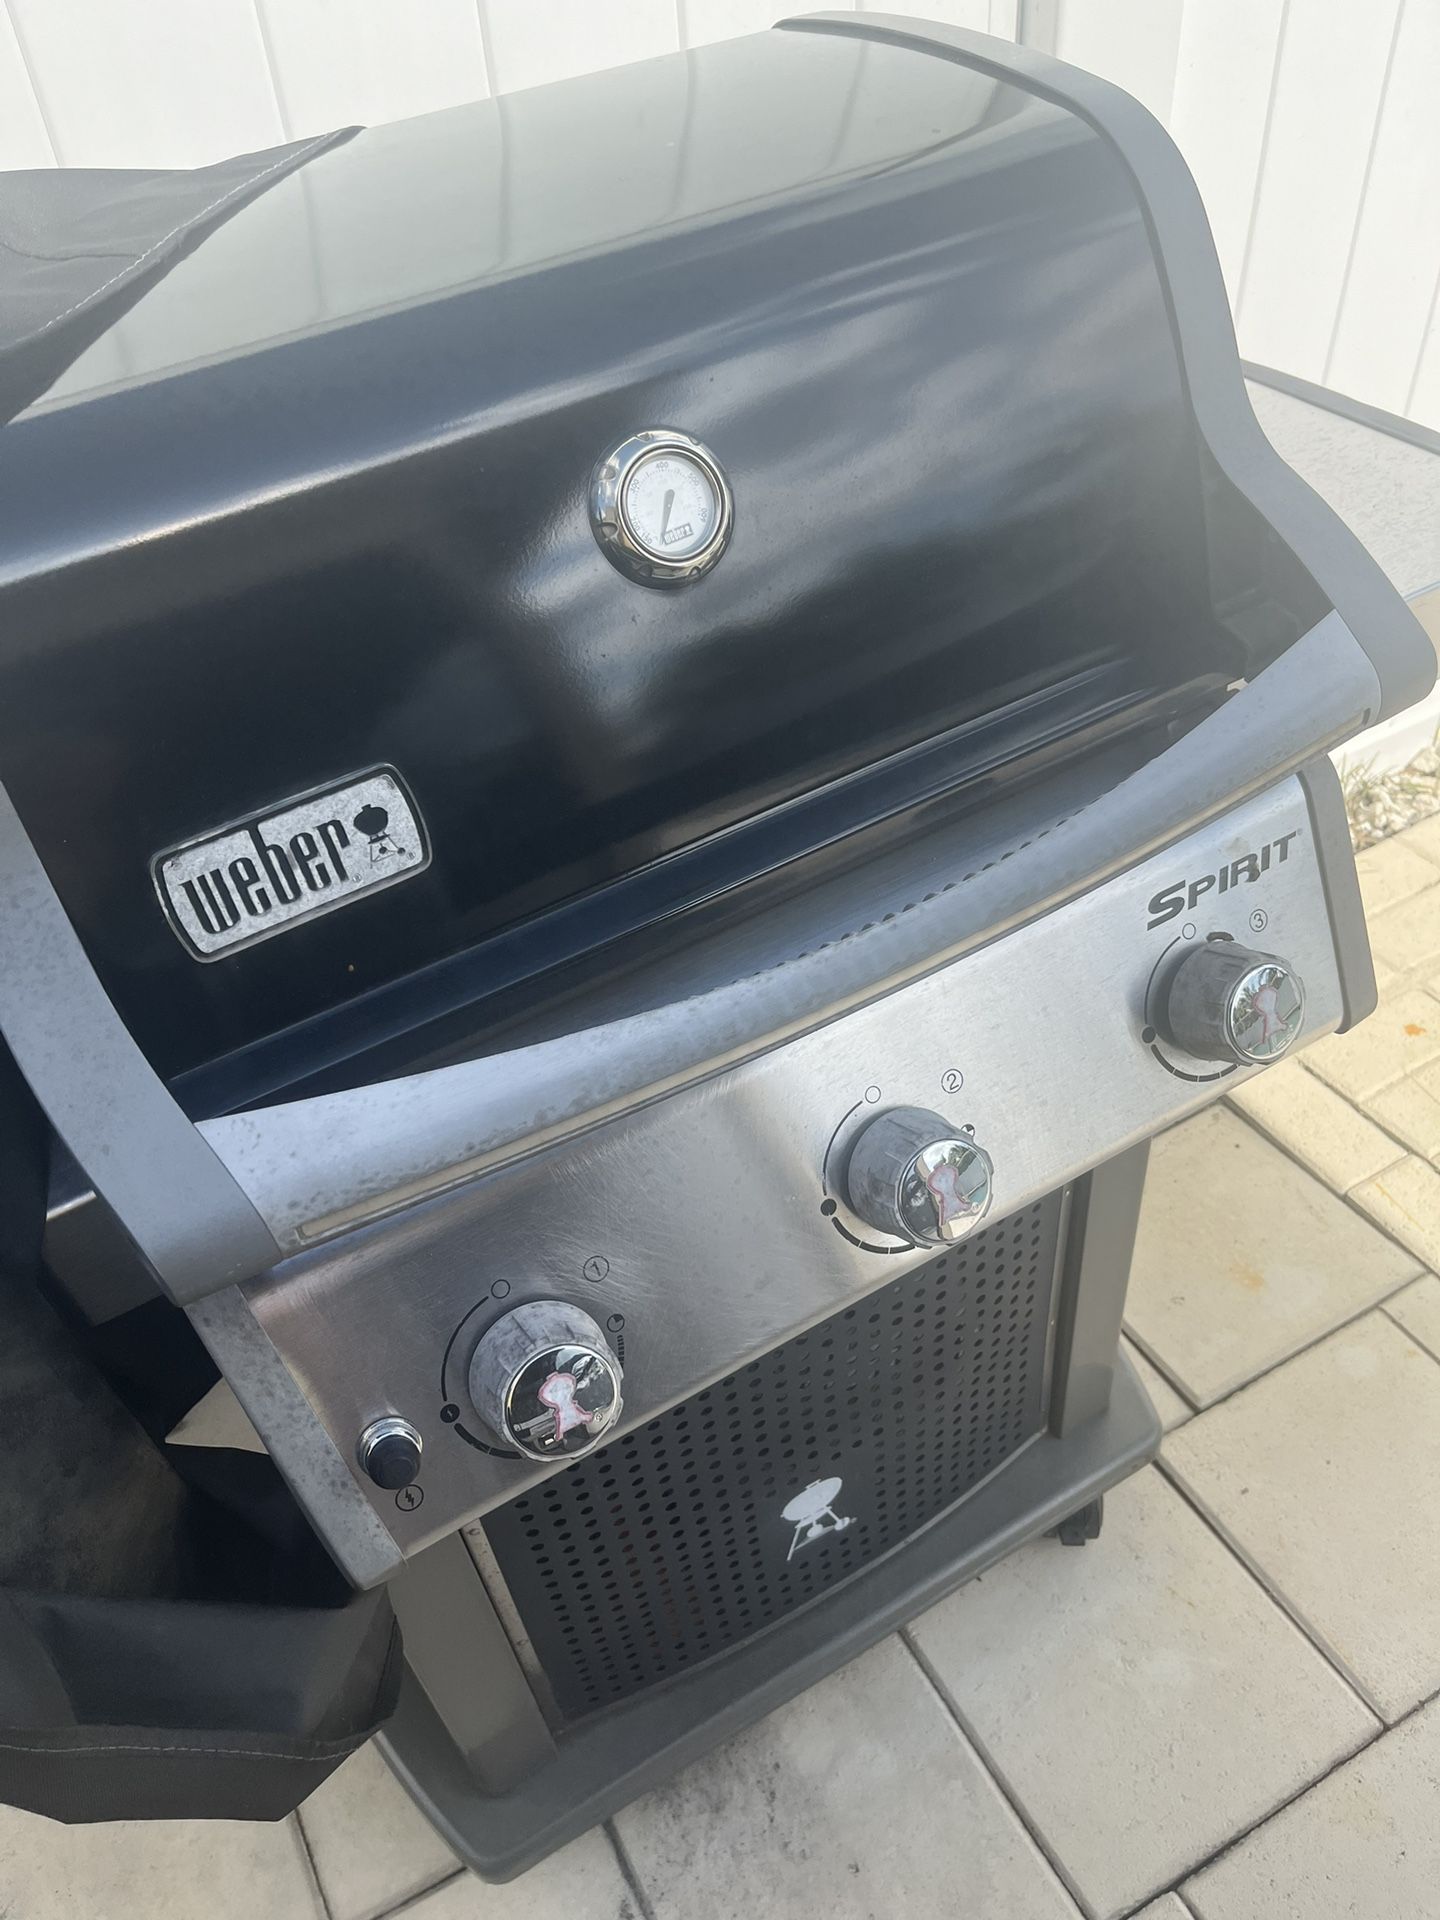 Weber BBQ Grill and cover